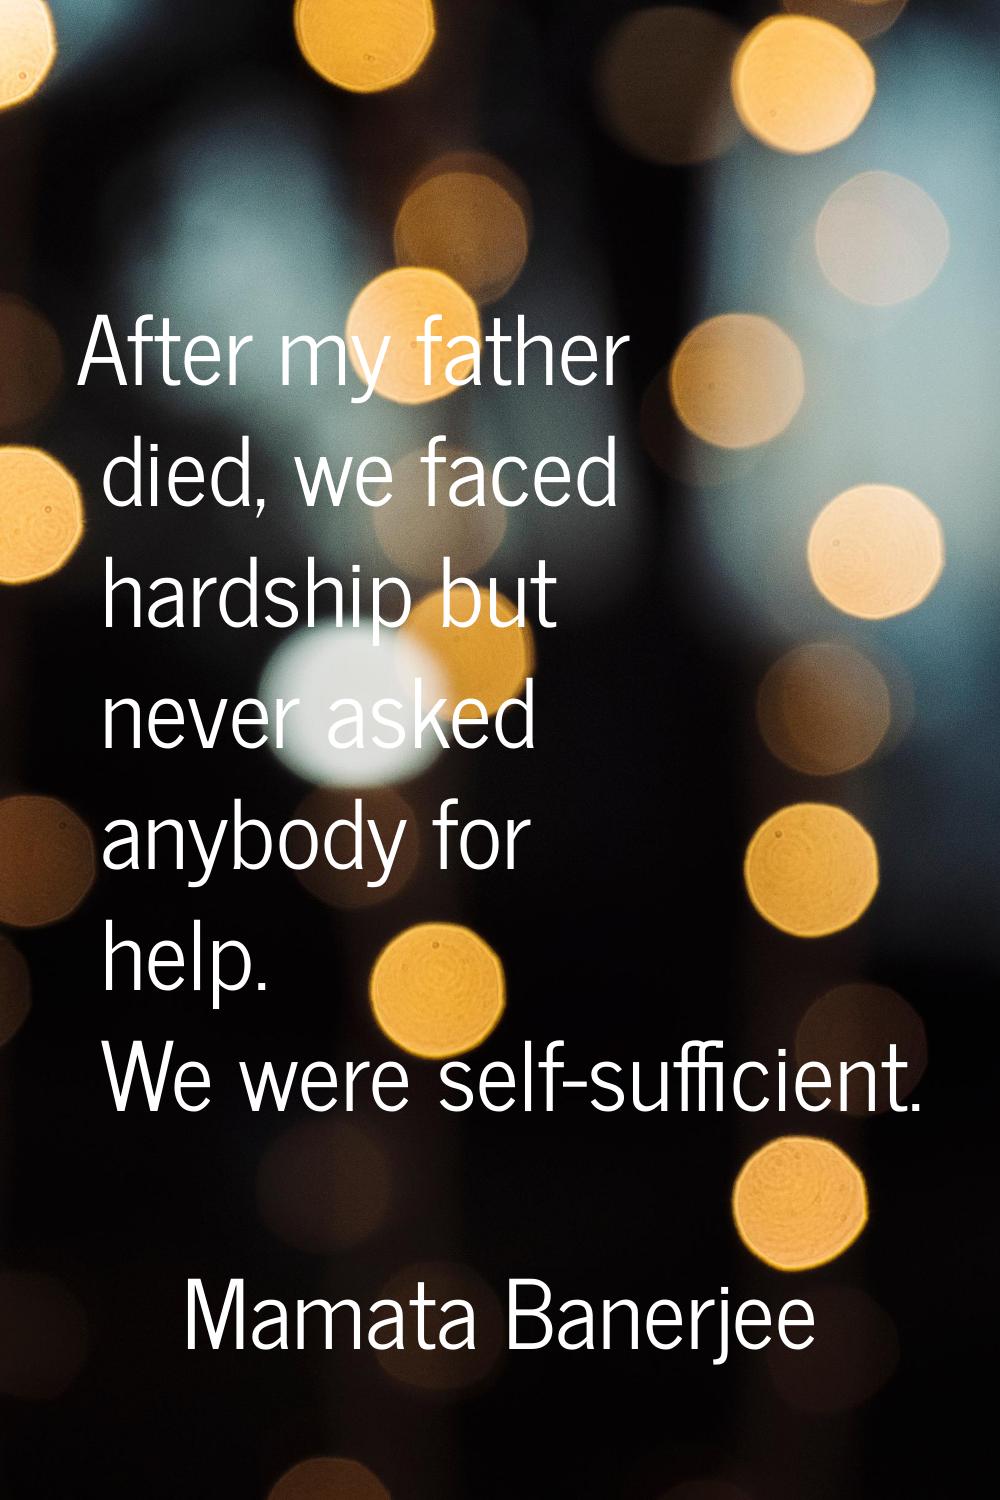 After my father died, we faced hardship but never asked anybody for help. We were self-sufficient.